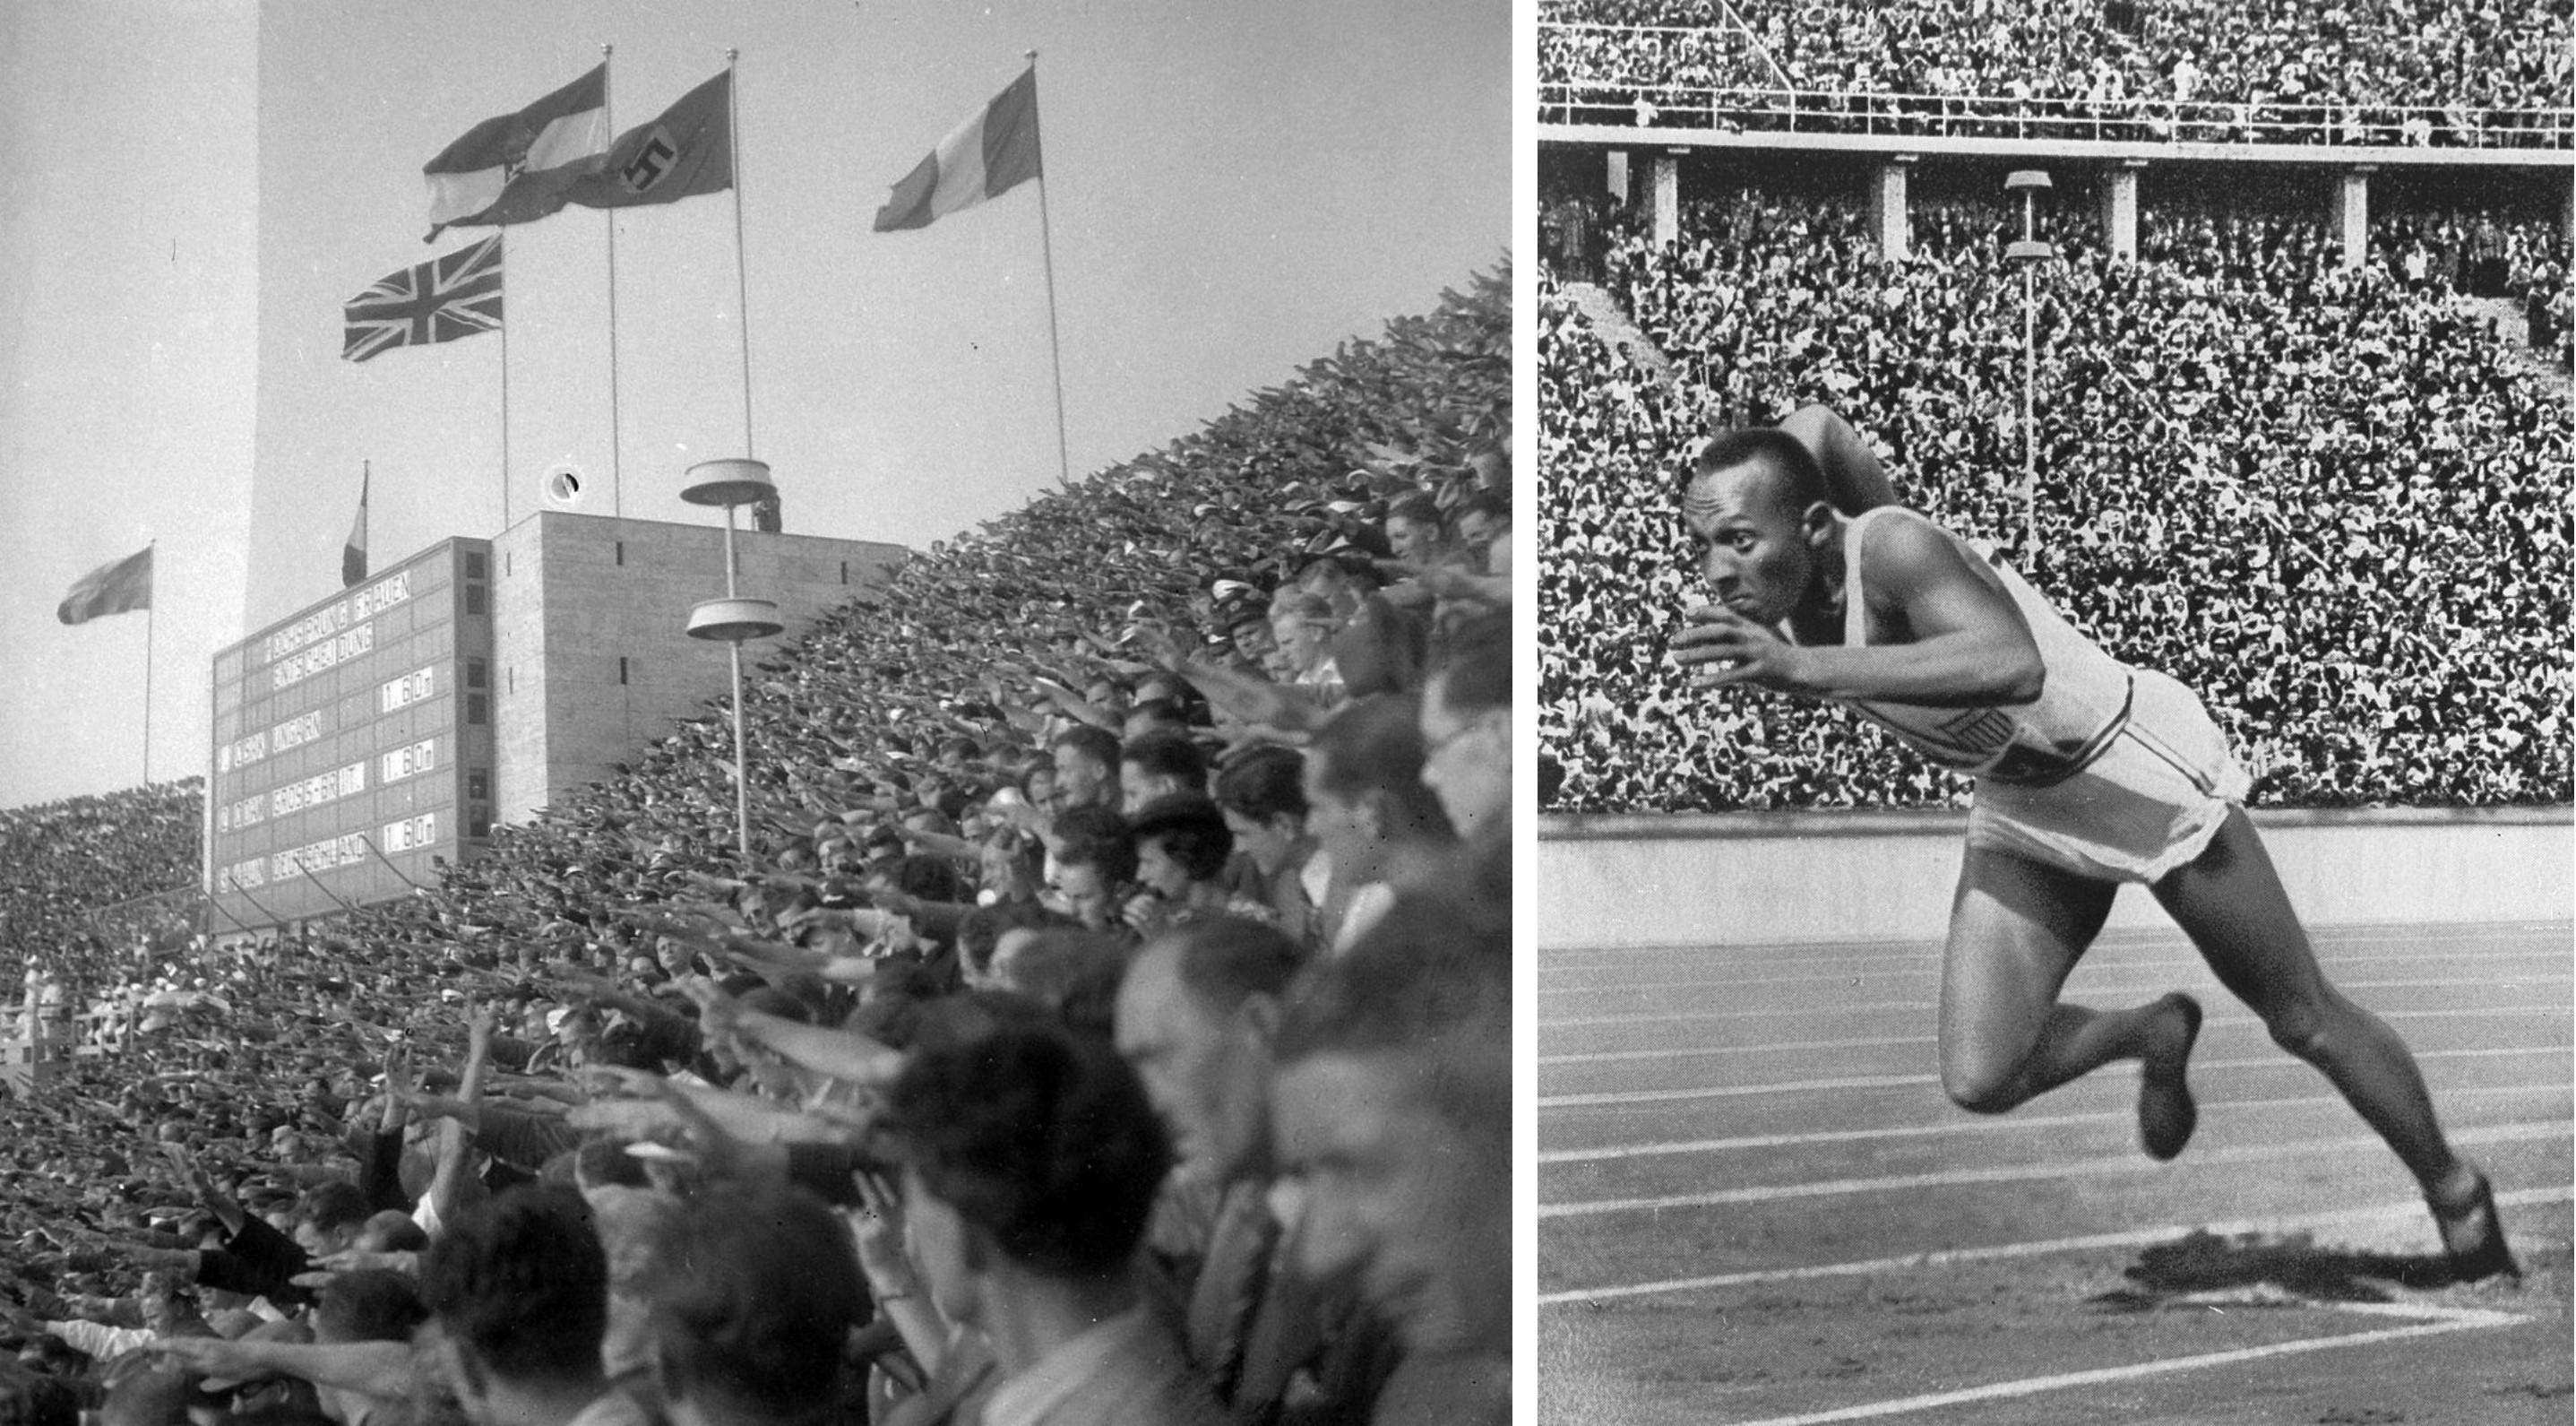 On the left, spectators giving the Nazi salute during the 1936 Summer Olympics. On the right, U.S. sprinter Jesse Owens.